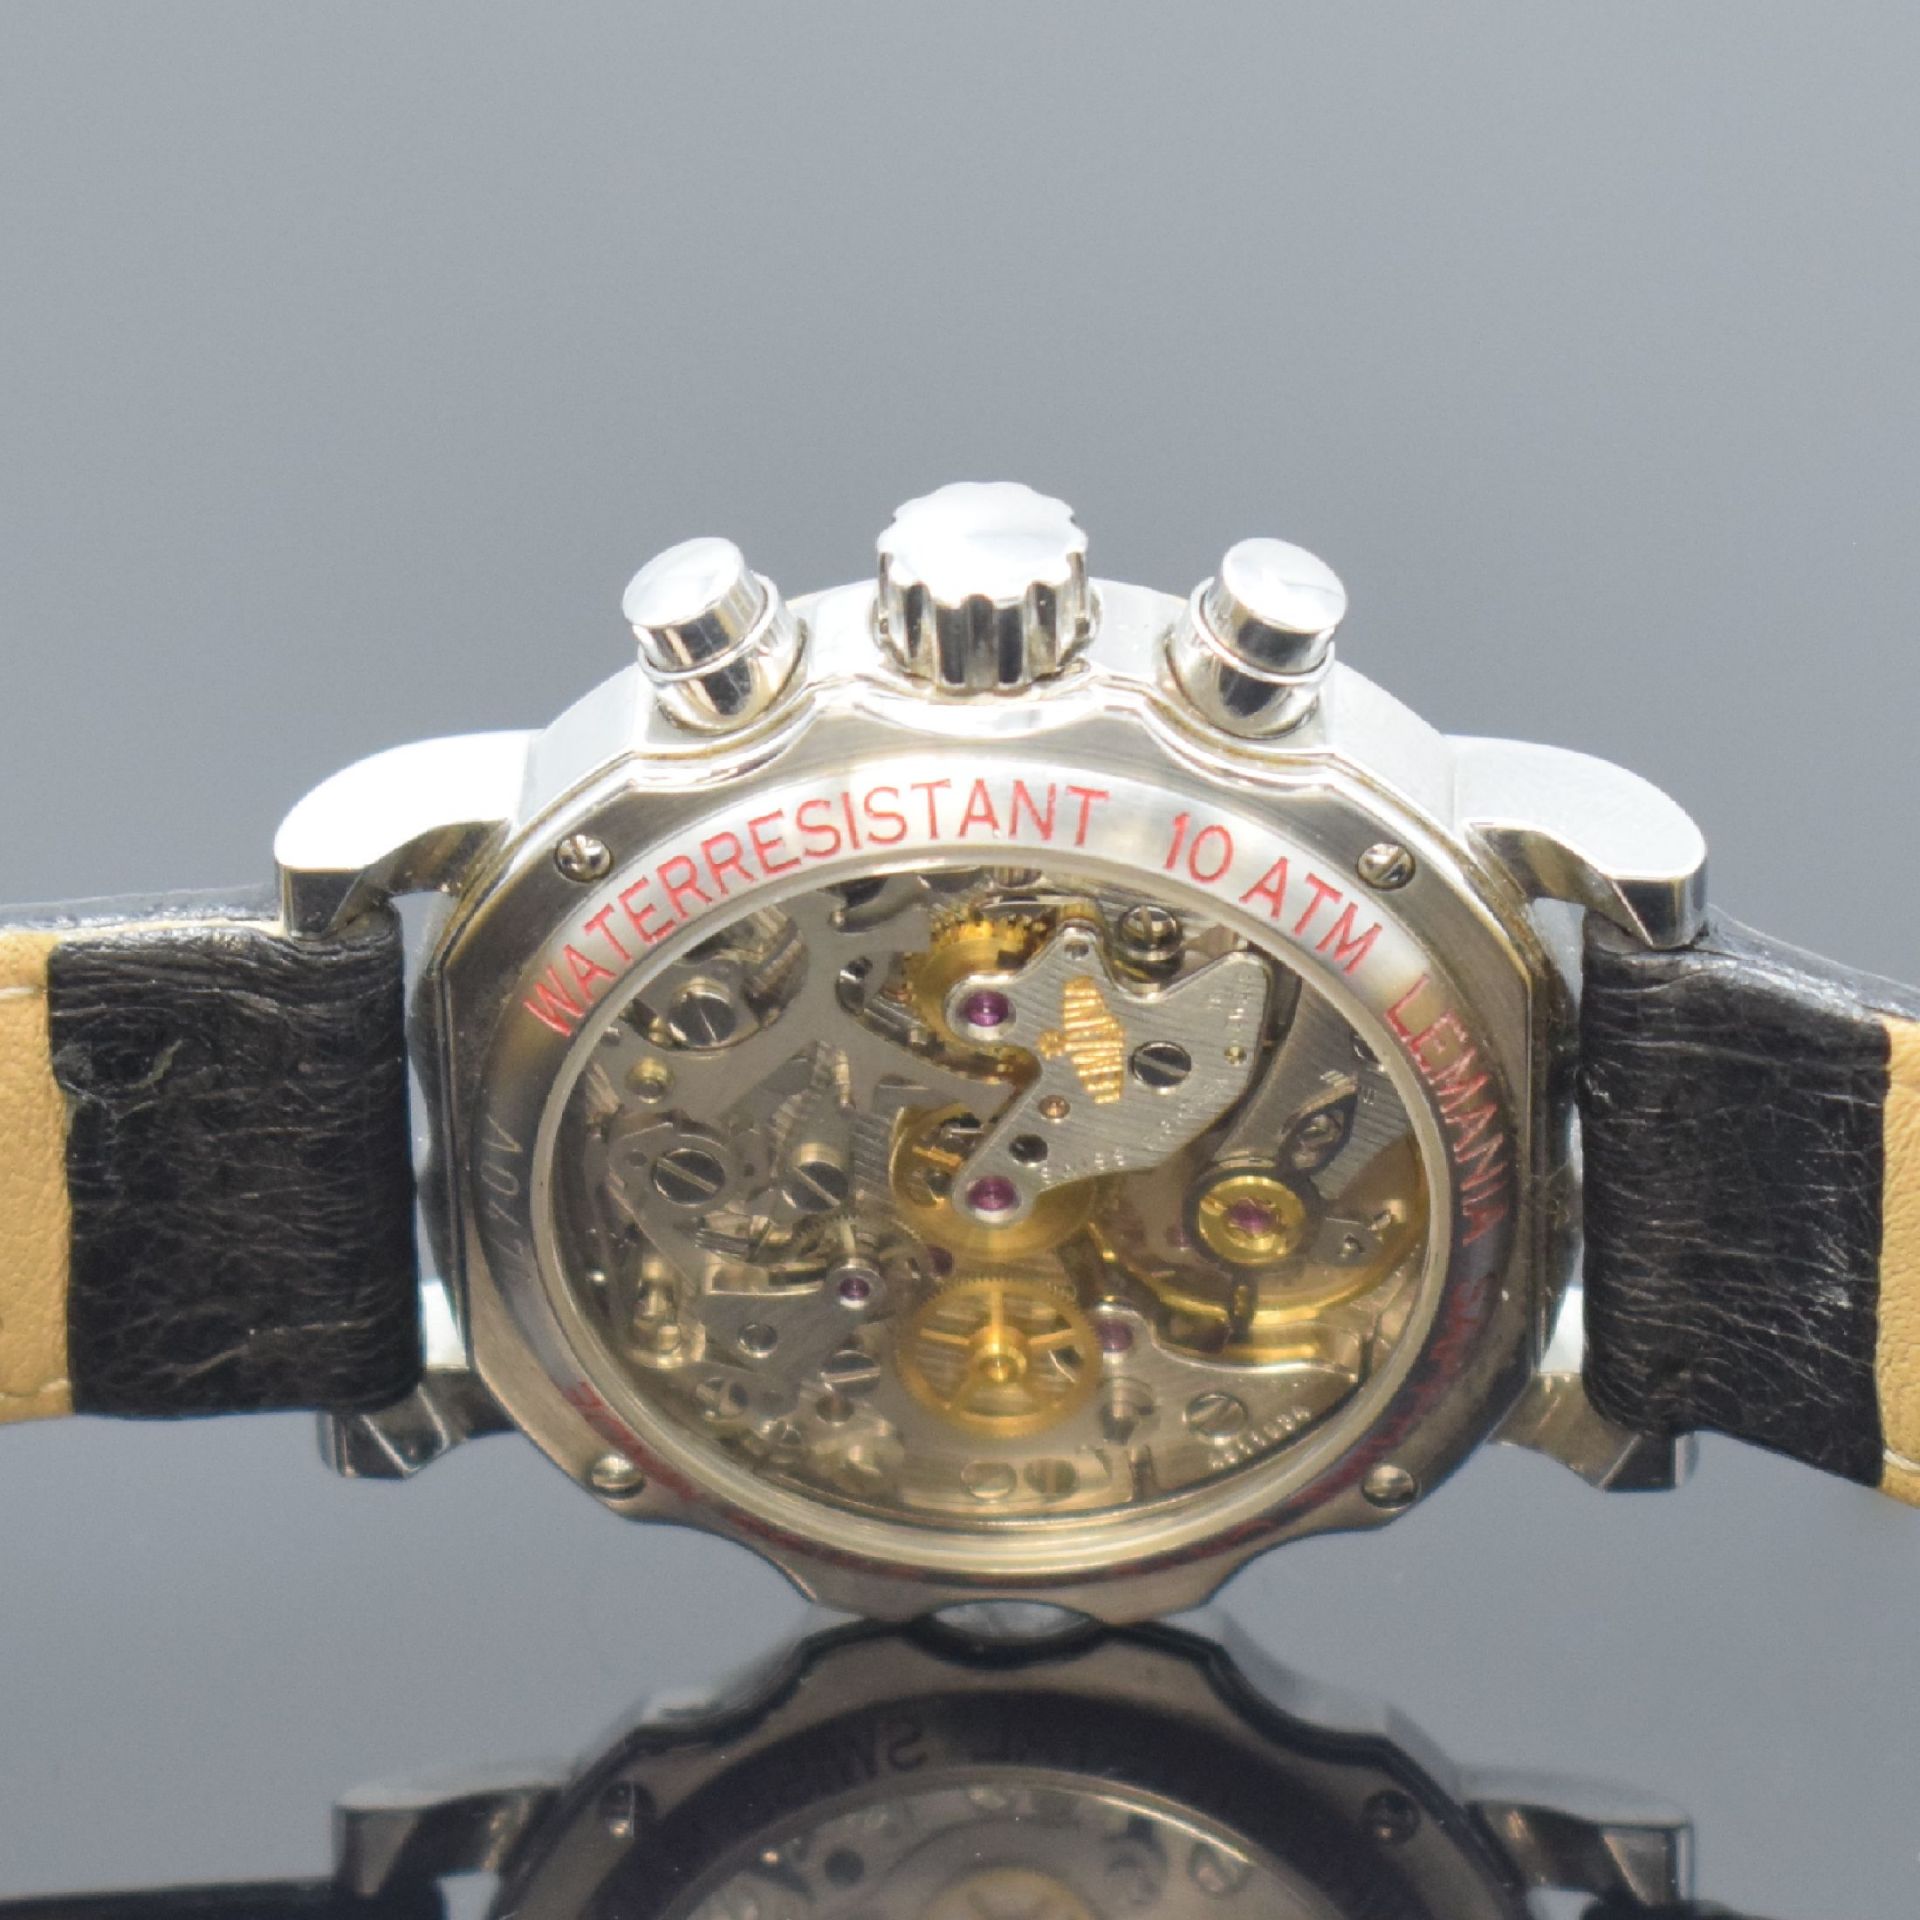 MERCEDES BENZ / LEMANIA 1872 Armbandchronograph in - Image 5 of 6